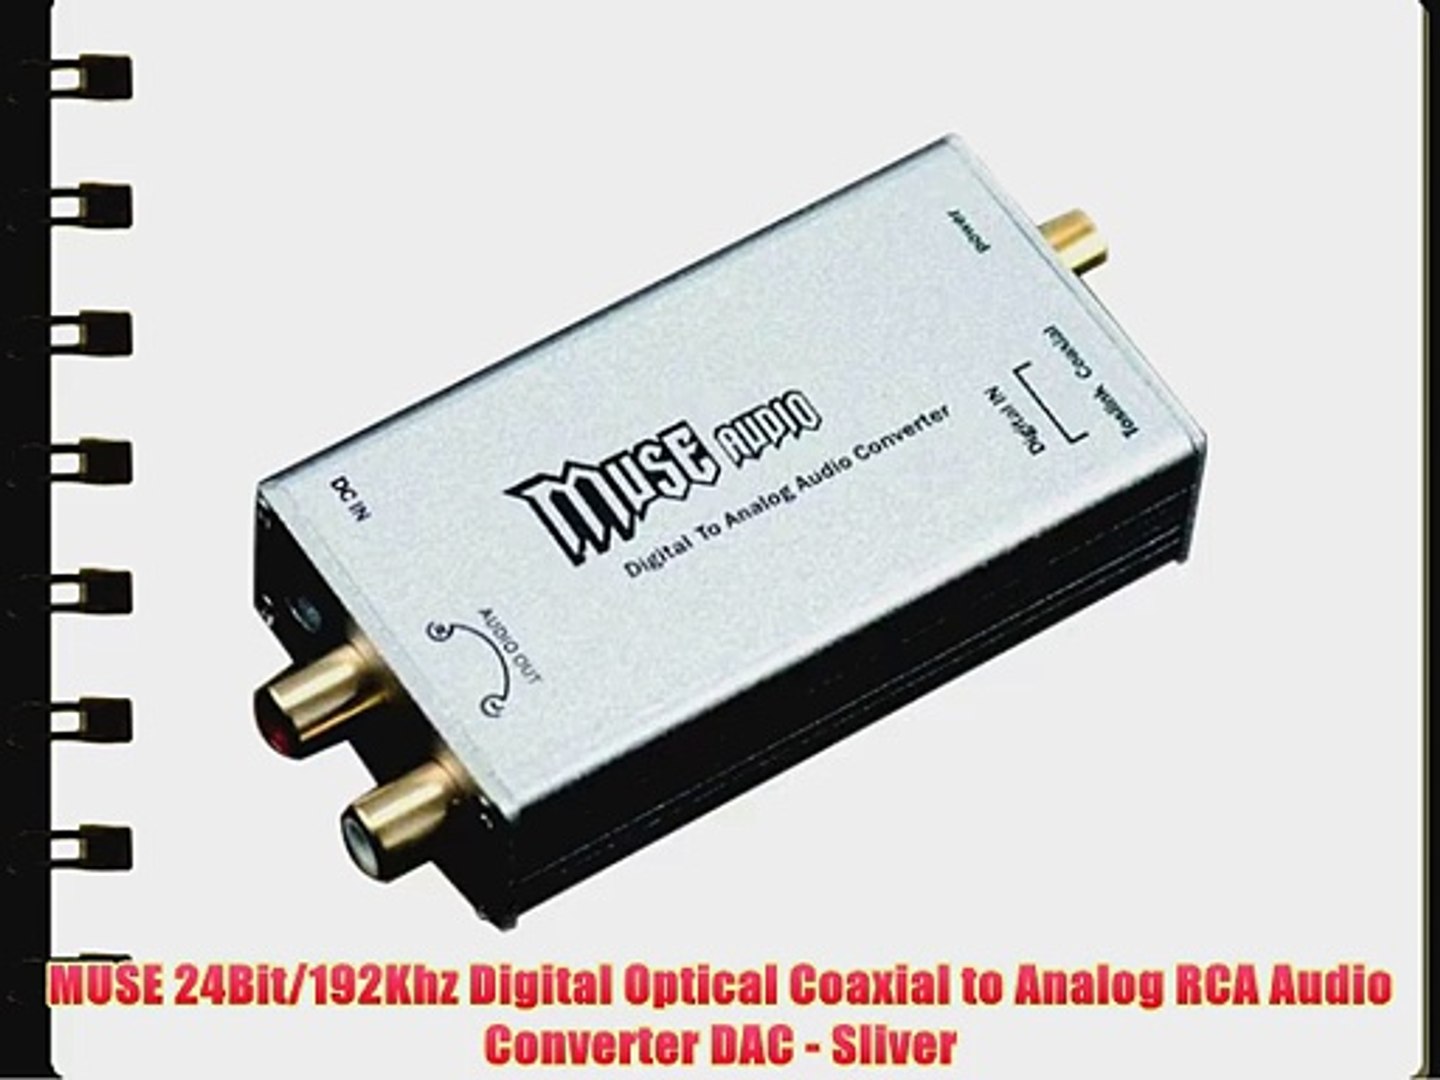 MUSE 24Bit/192Khz Digital Optical Coaxial to Analog RCA Audio Converter DAC Sliver - video Dailymotion